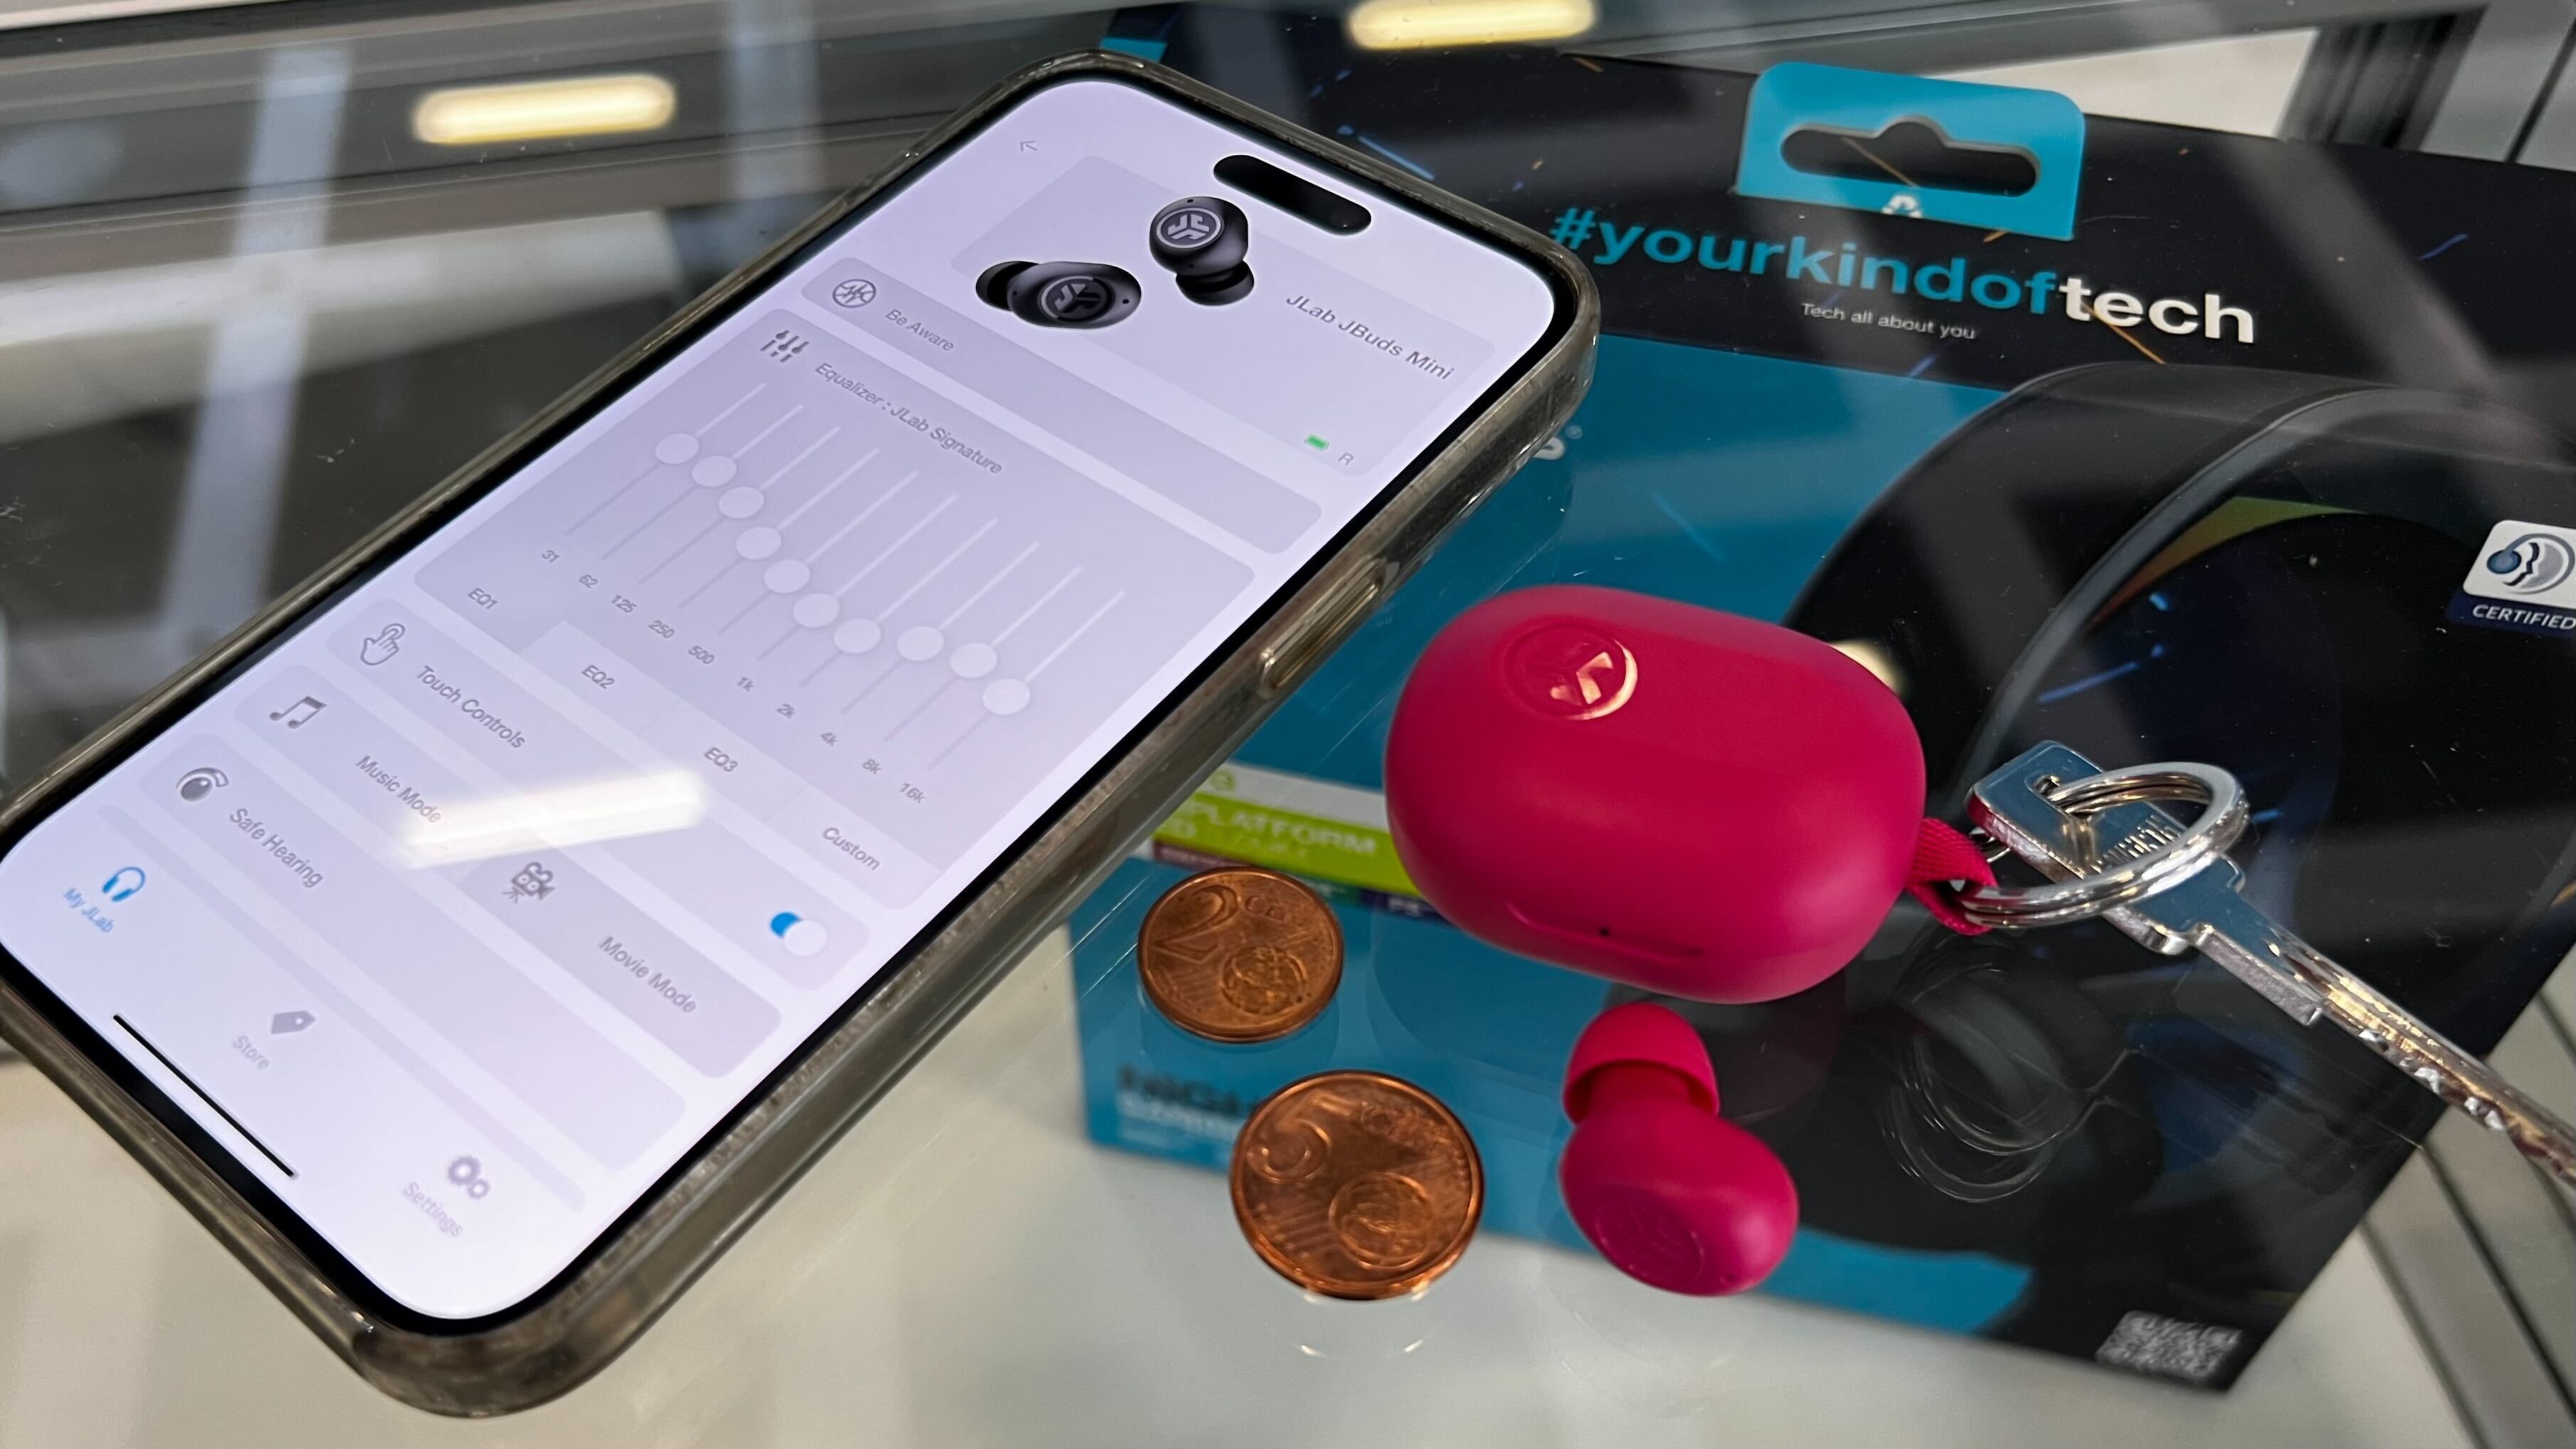 The JLab JBuds Mini earbuds on a keyring next to a phone